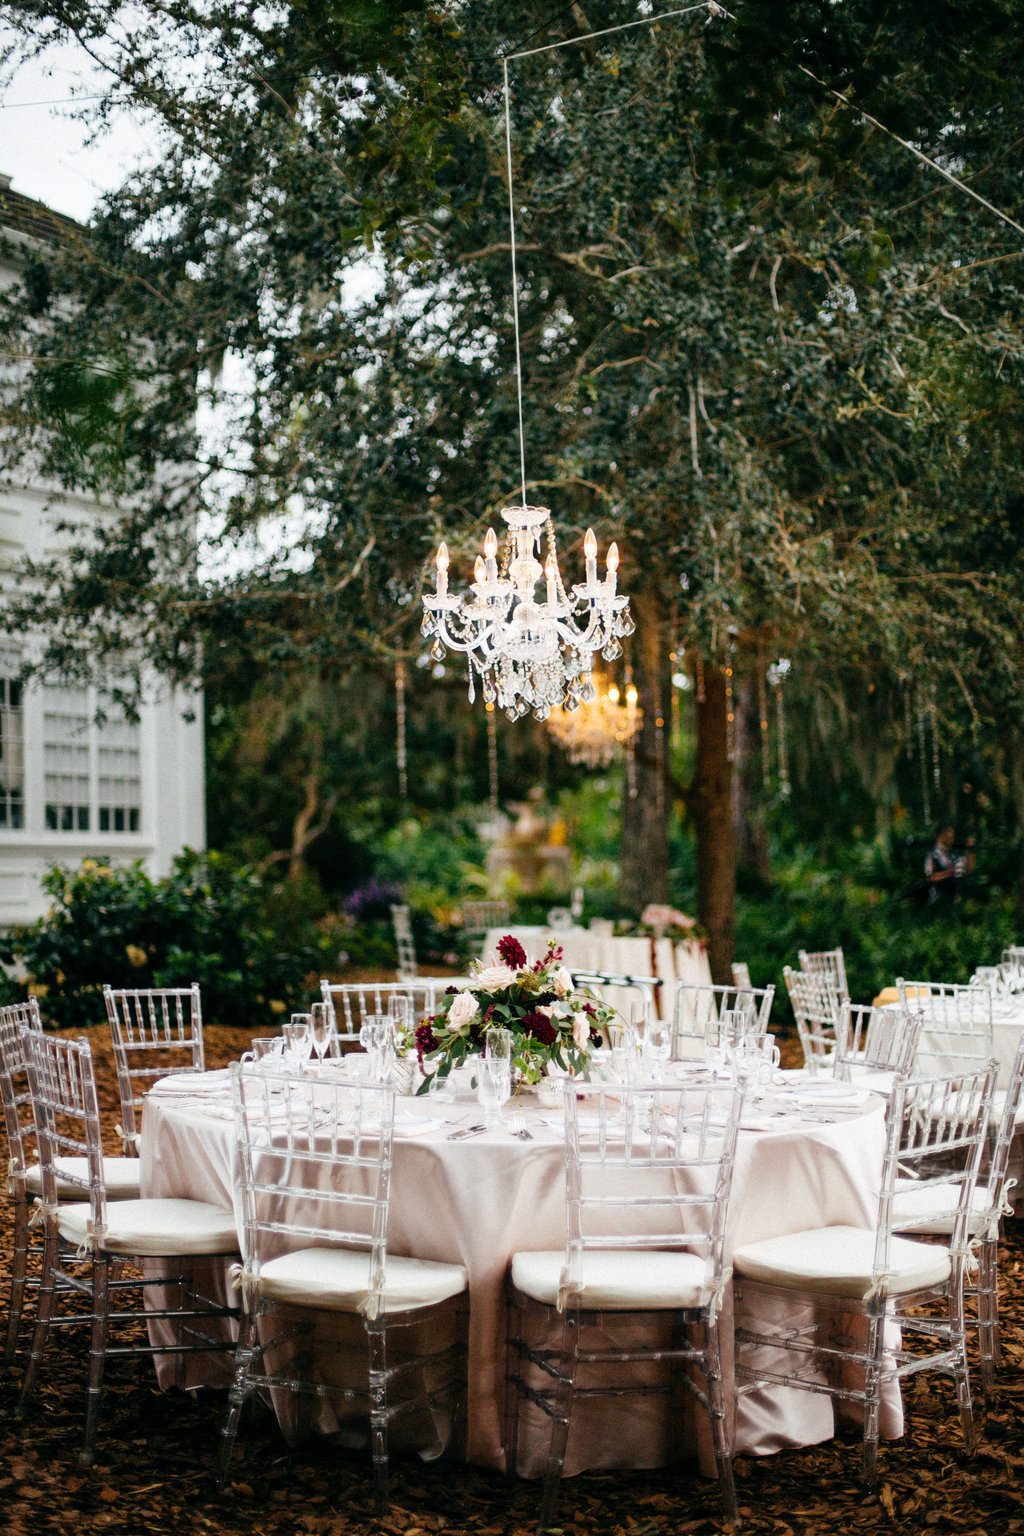 Outdoor Garden Wedding Reception Decor, Round Tables with Ivory Tablecloths, Ghost Acrylic Chiavari Chairs, Low Flower Centerpiece, Hanging Crystal Chandelier | Sarasota Wedding Venue Marie Selby Botanical Gardens | Tampa Bay Wedding Planner NK Productions